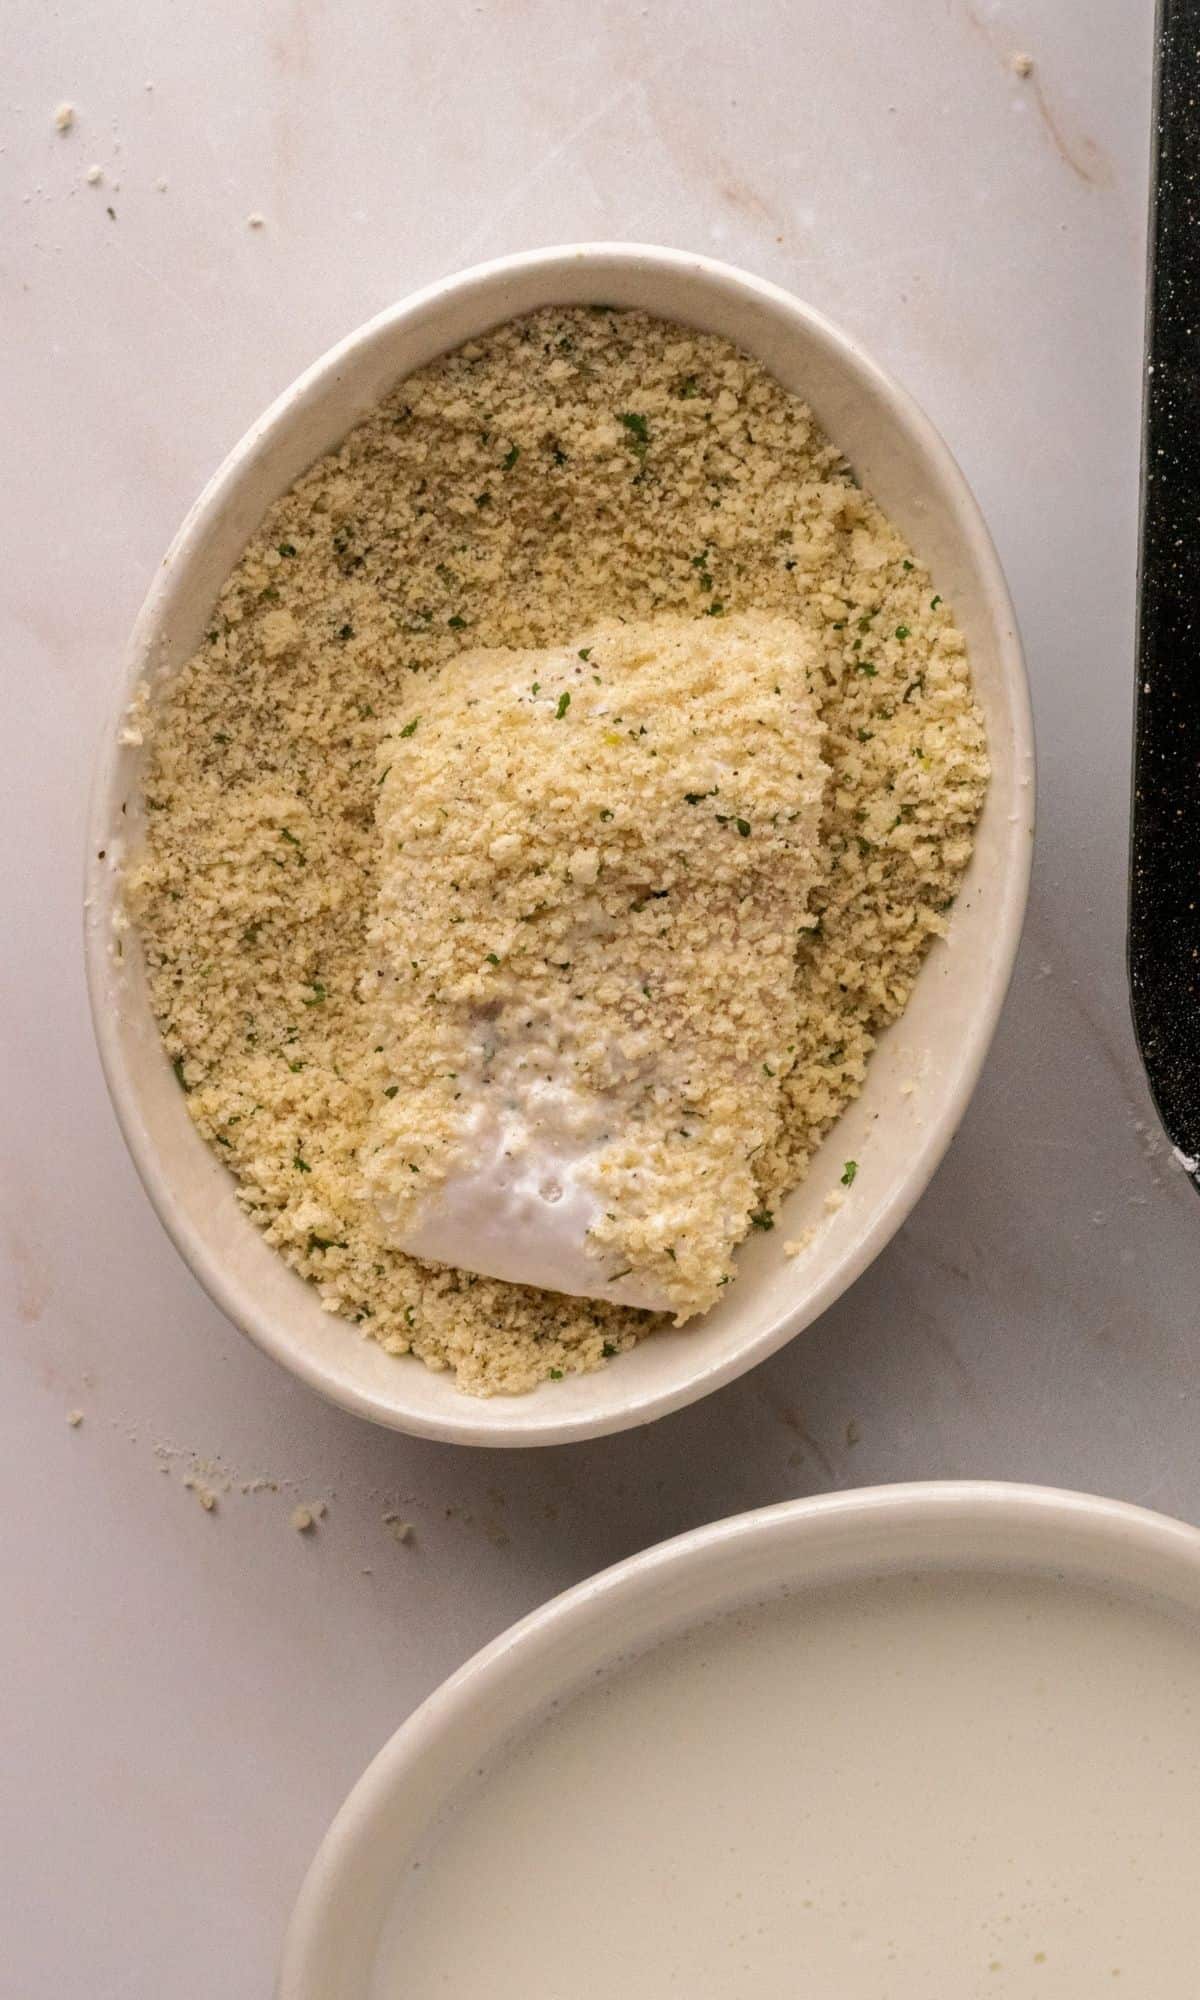 Crunchy Baked Cod with Parmesan Panko Crumbs preparation of dredging in breadcrumb mixture.